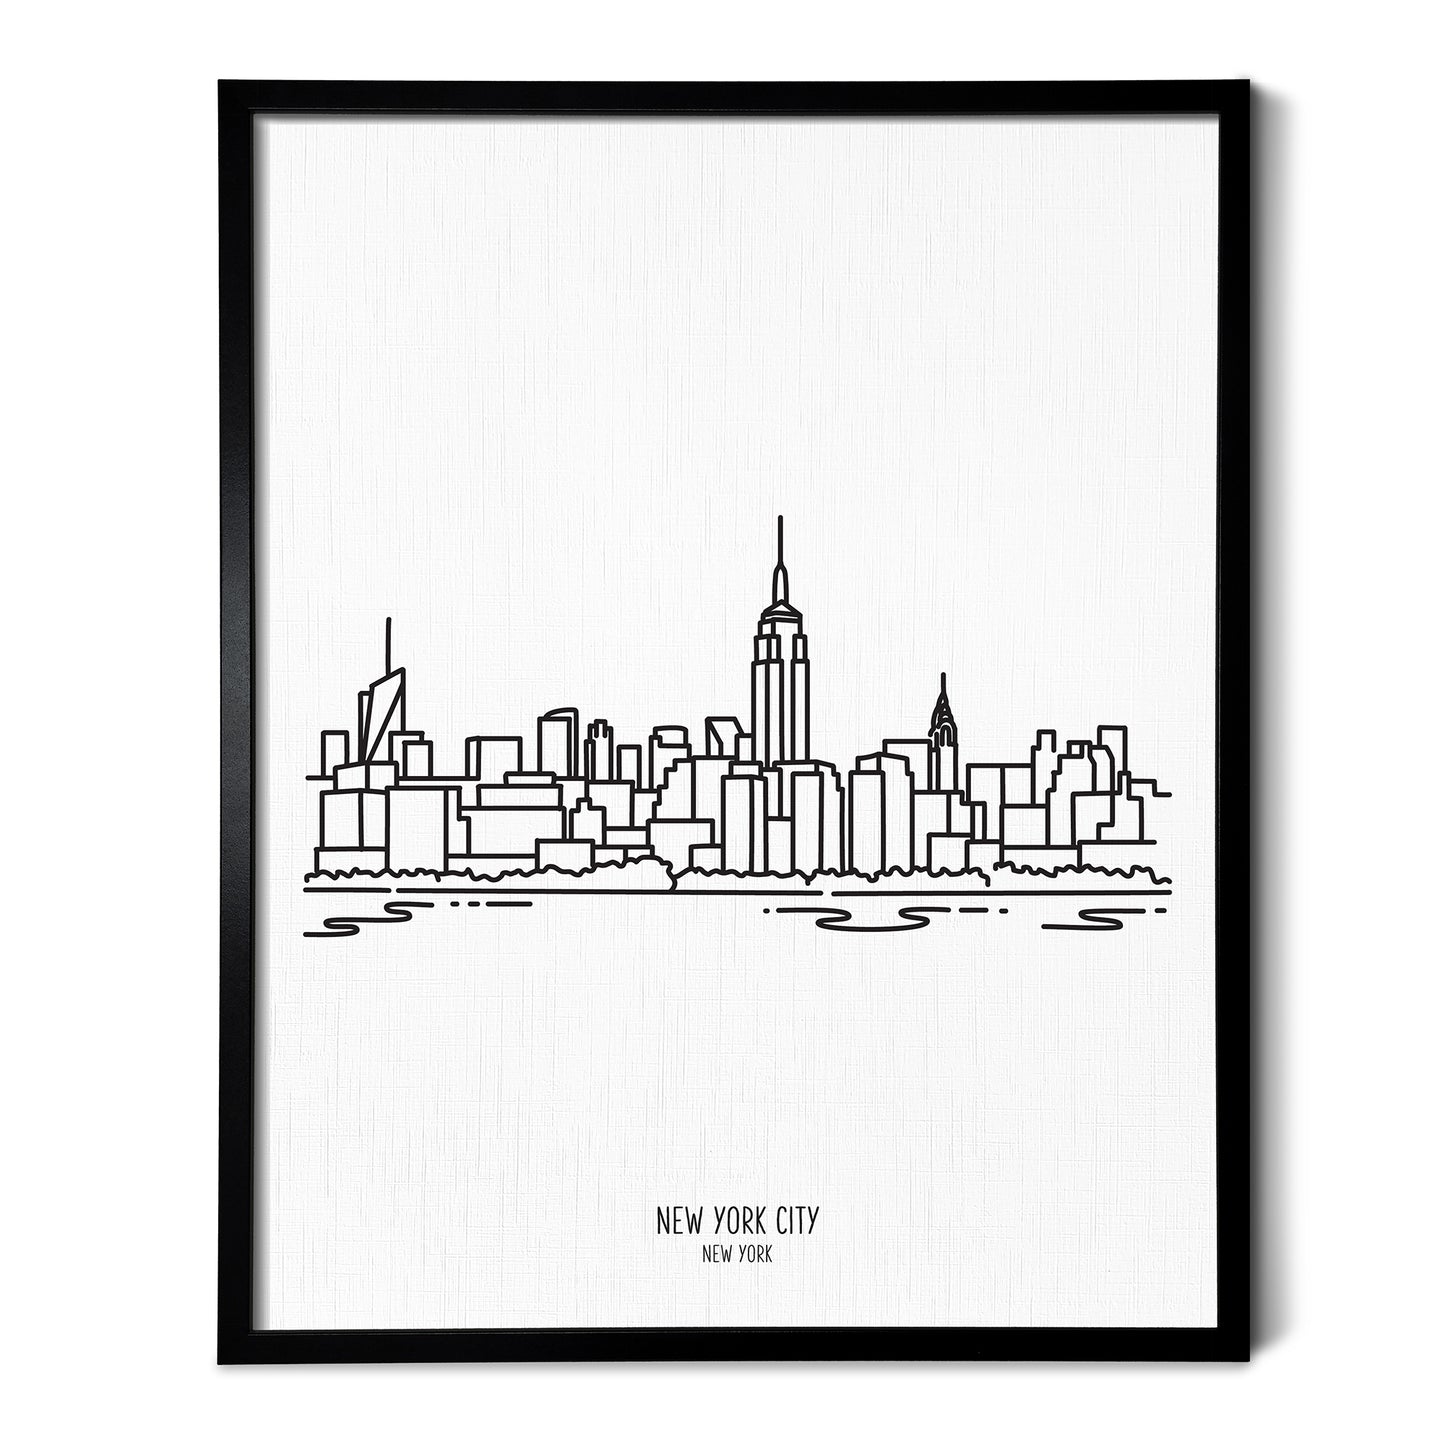 A line art drawing of the New York City Skyline on white linen paper in a thin black picture frame